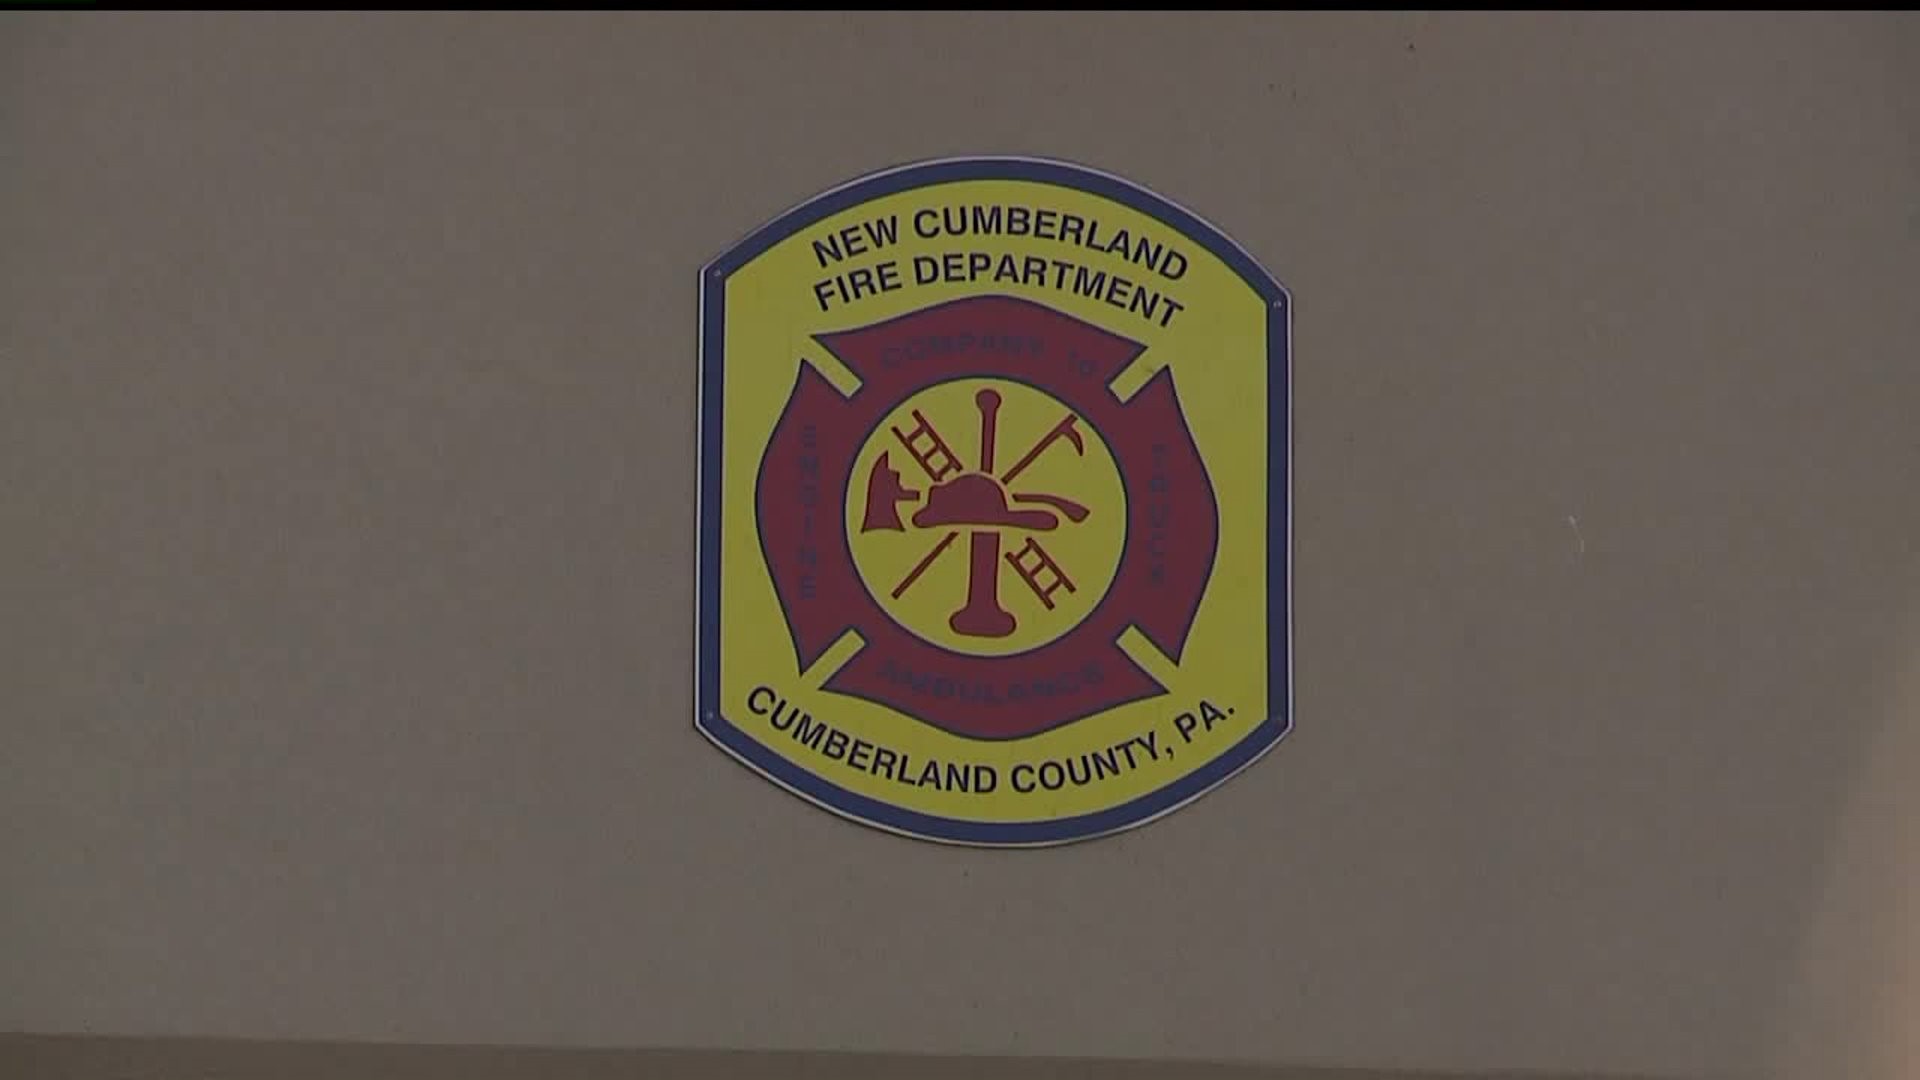 Volunteer fire police officer accused of sexually assaulting junior firefighter in New Cumberland